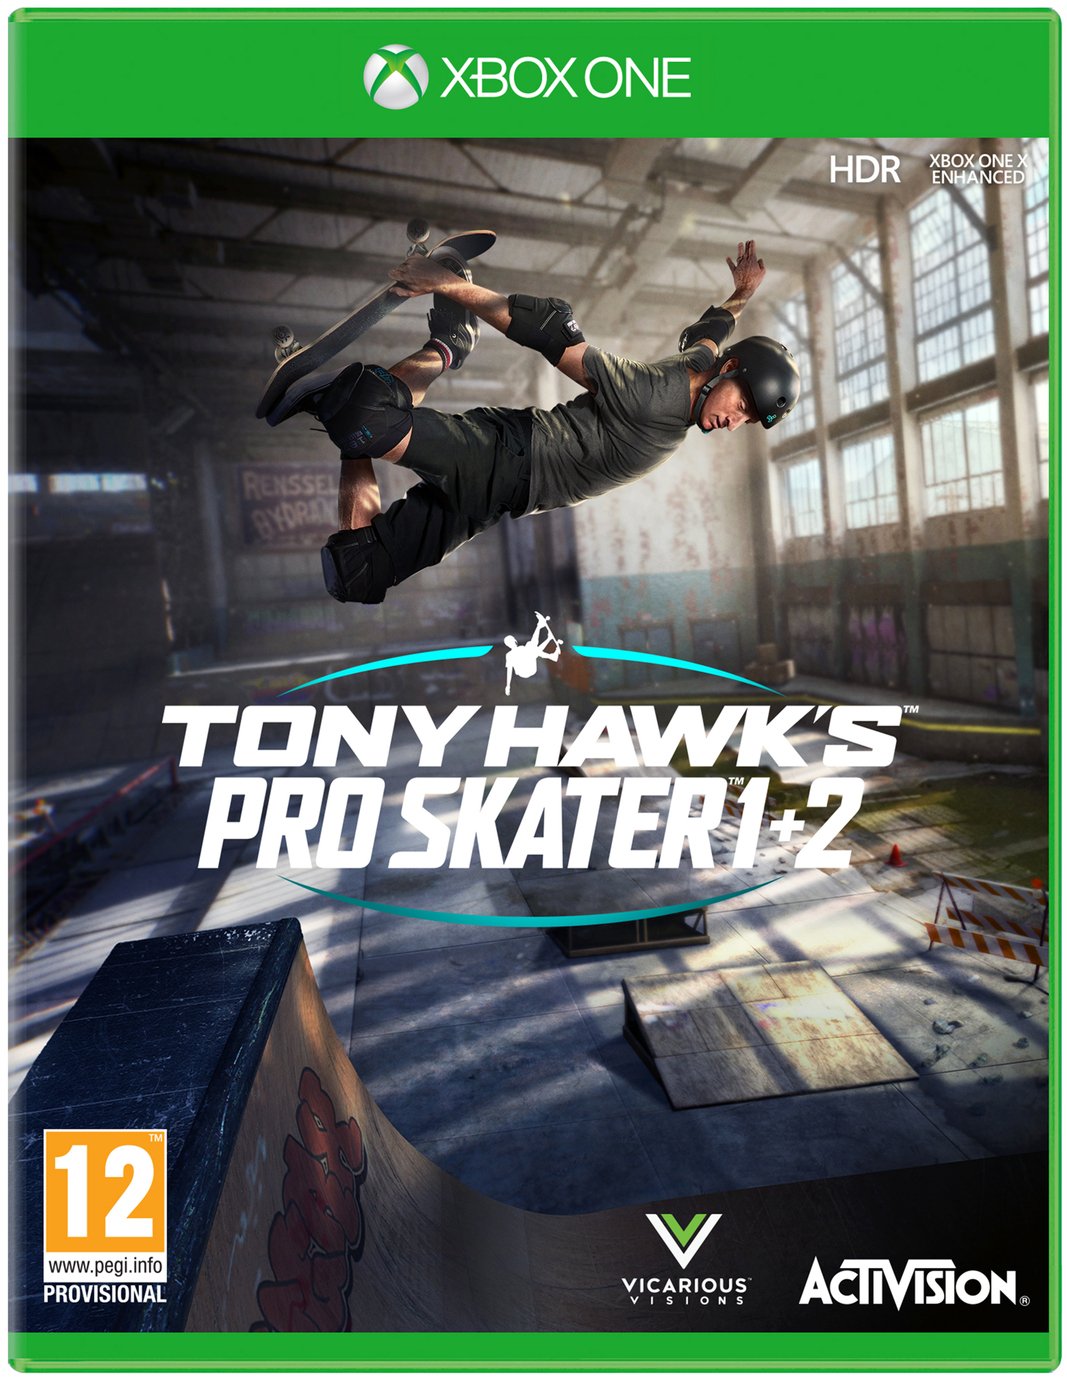 Tony Hawk's Pro Skater 1& 2 Xbox One Game Pre-Order Review